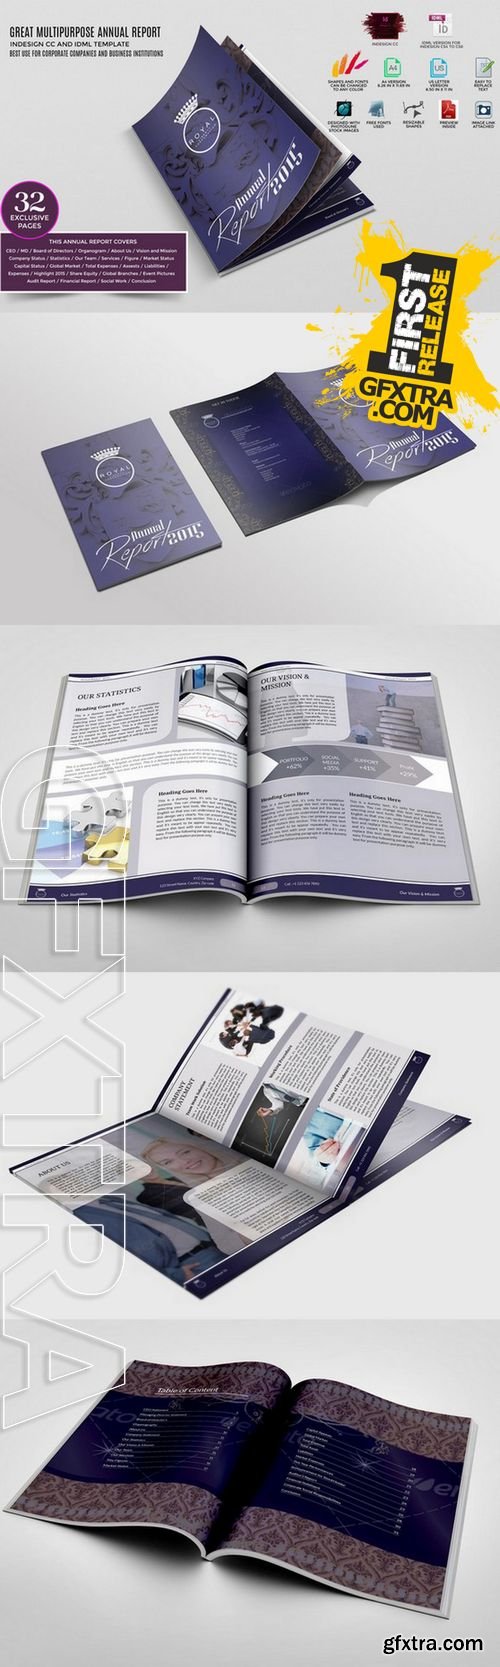 Ready Business Template for Report - CM 208286